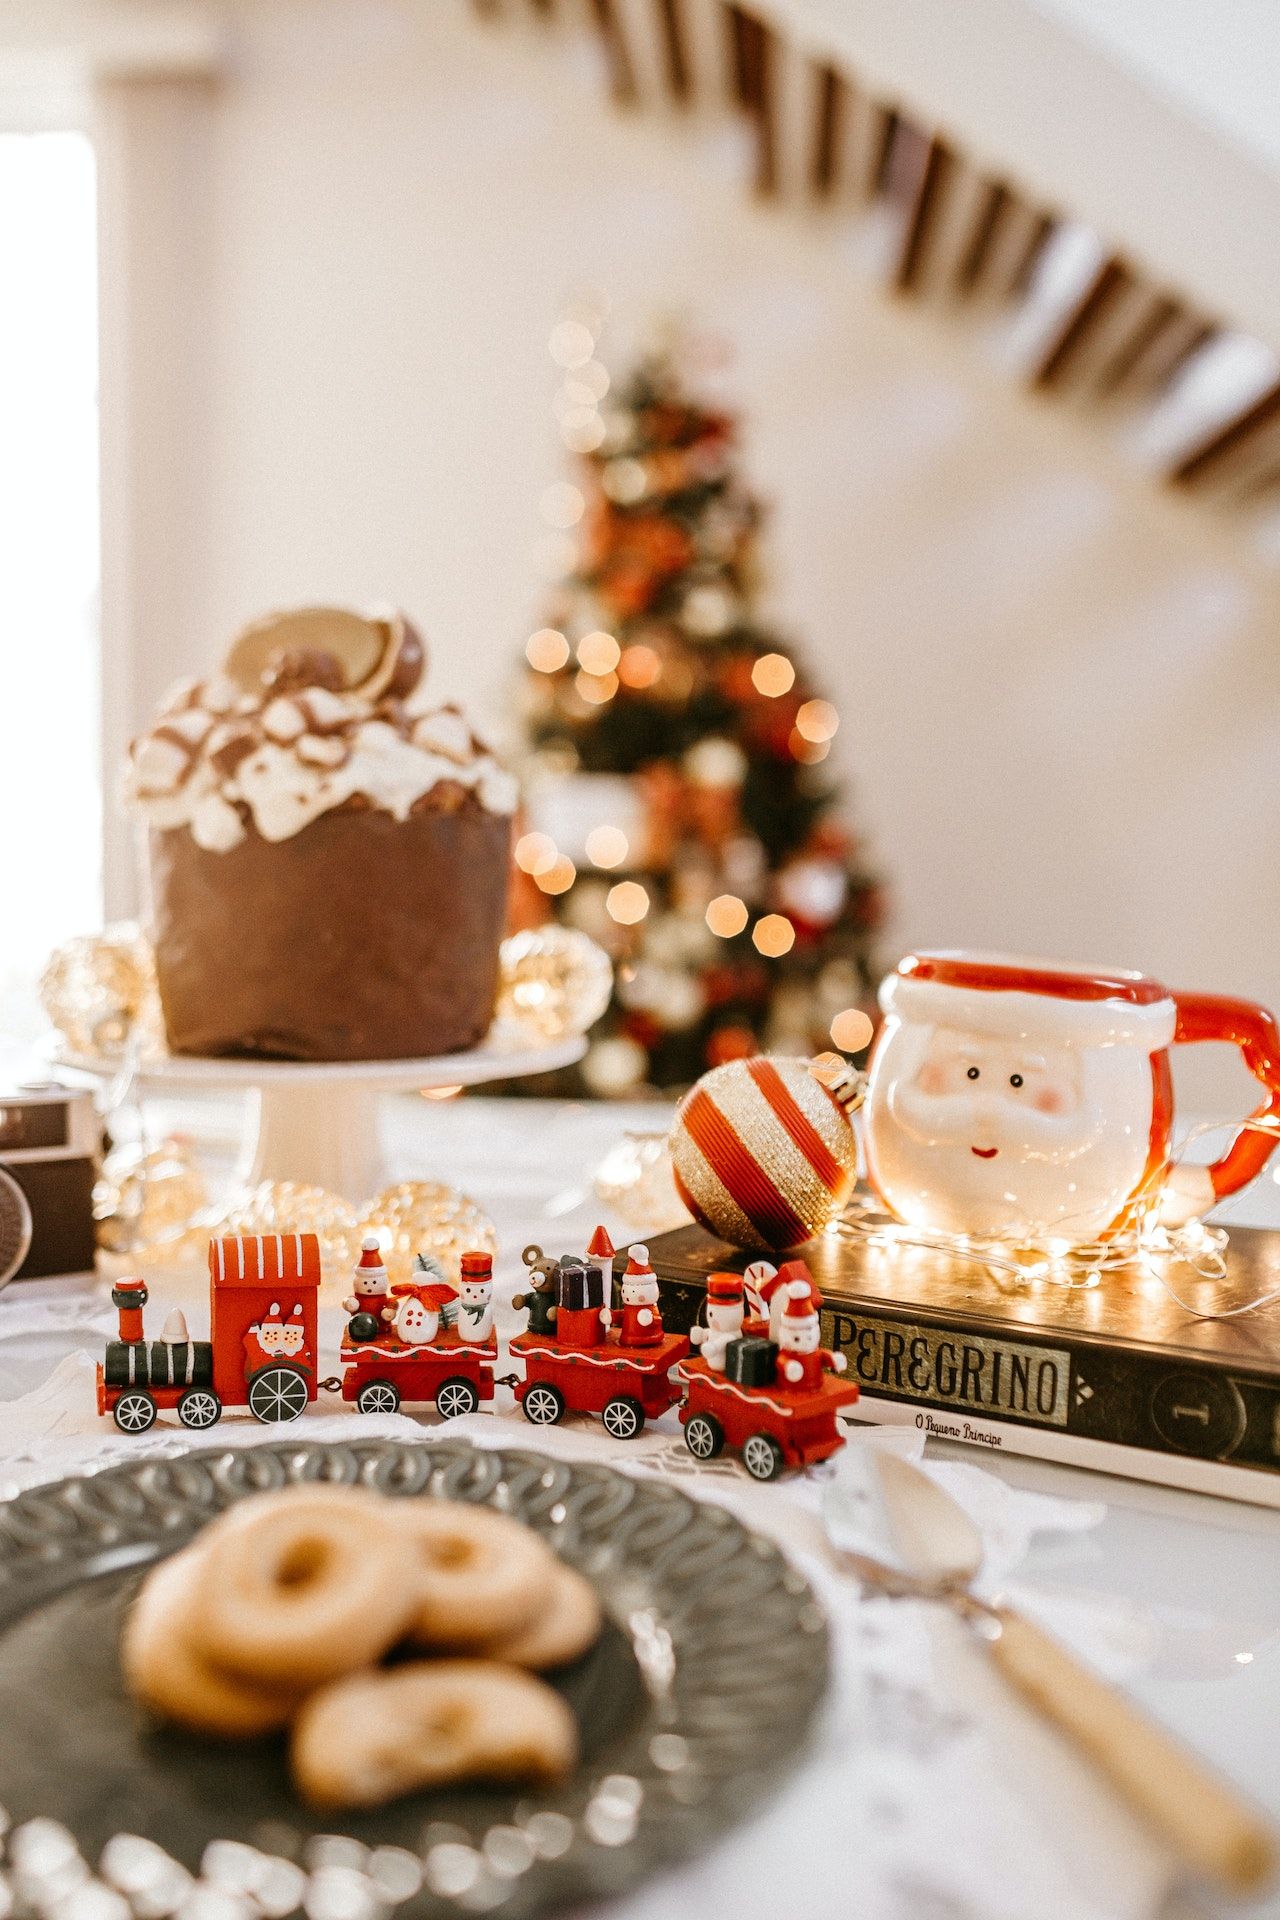 Our Favorite Christmas Traditions